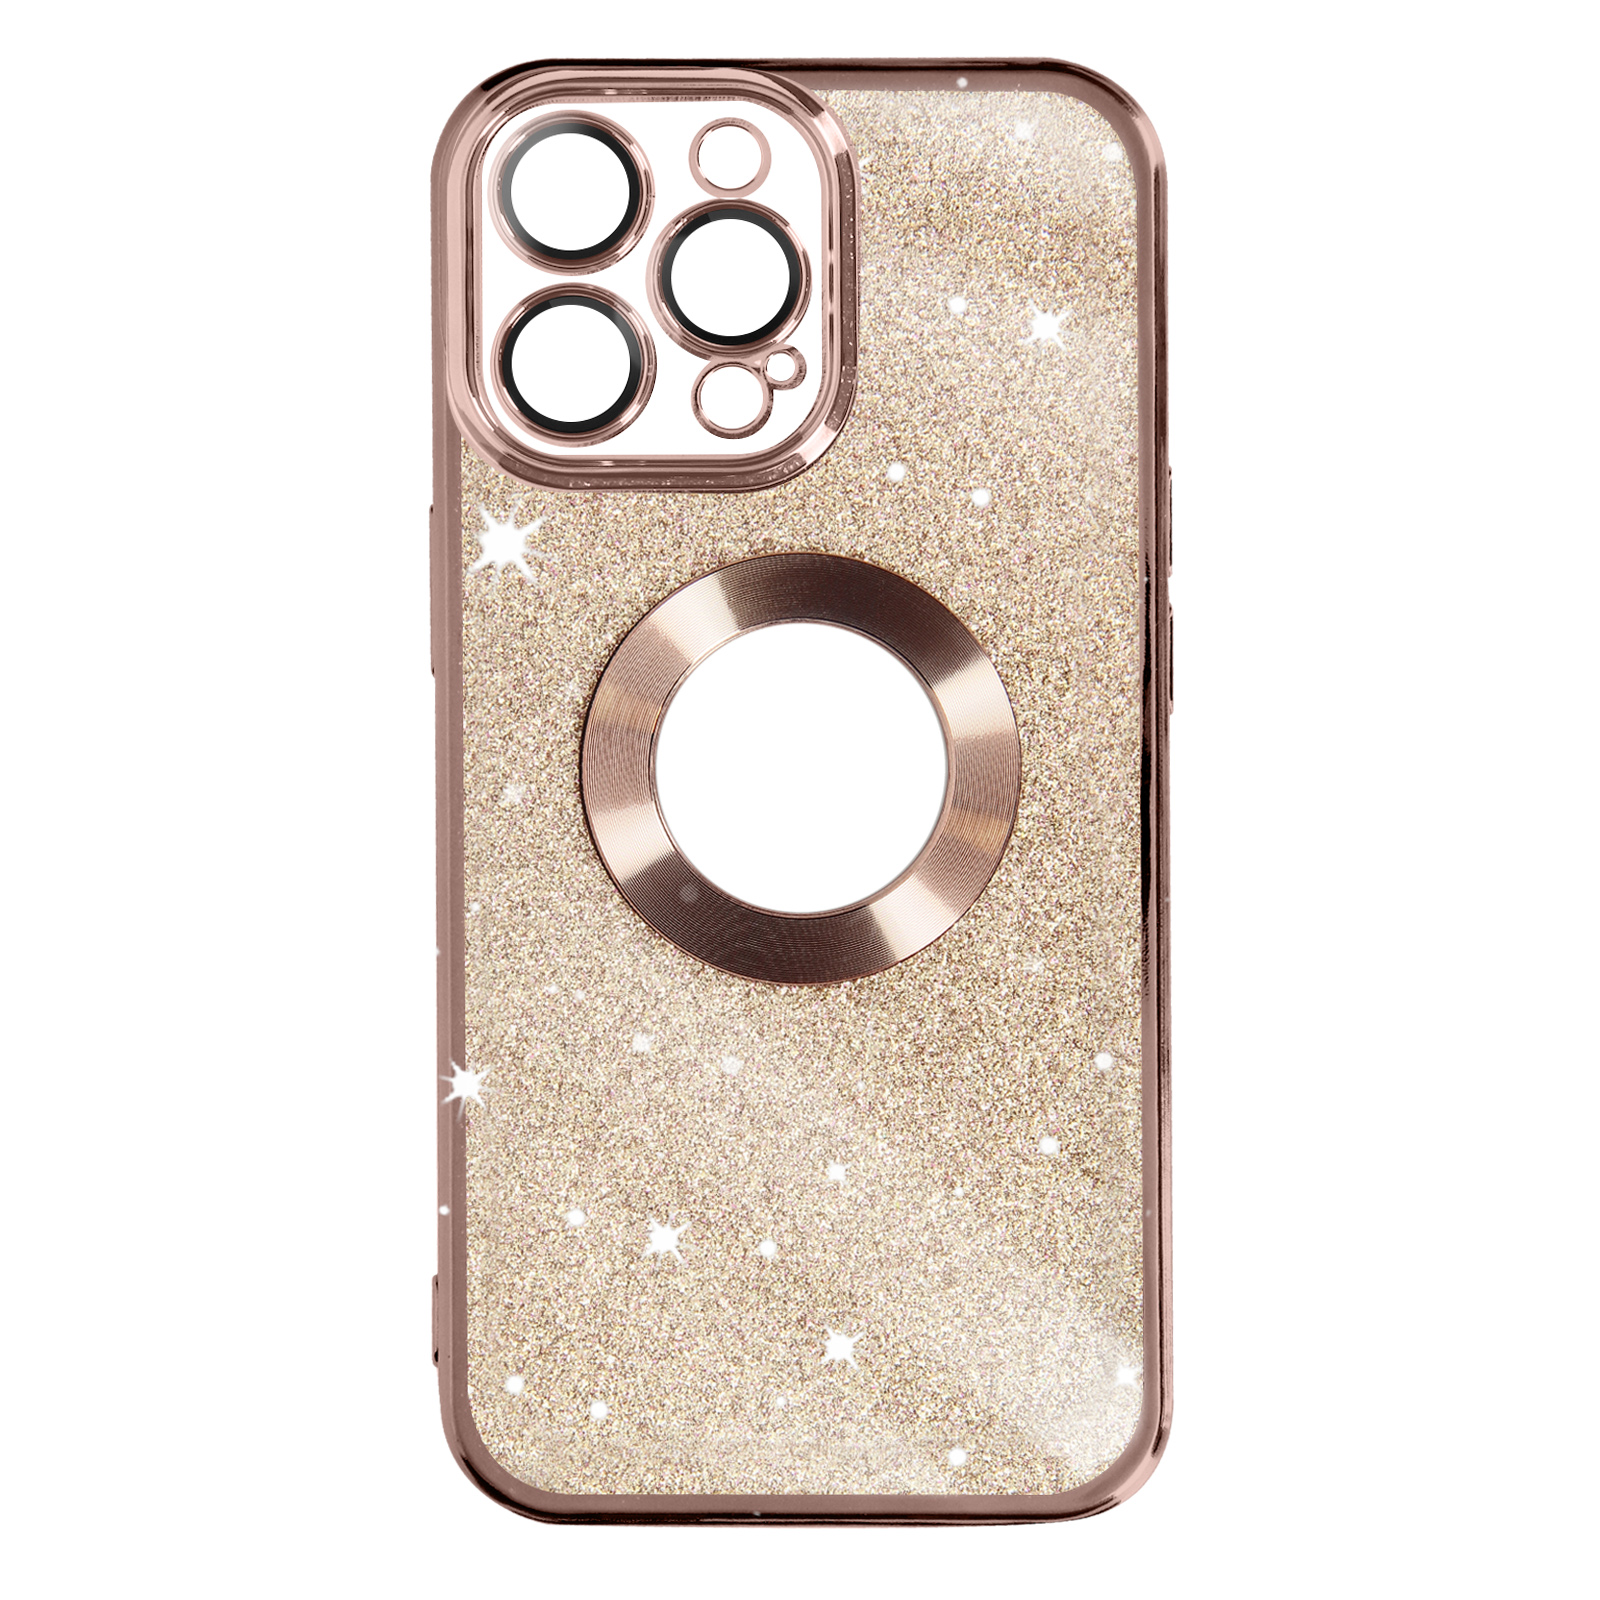 Apple, Protecam AVIZAR Max, 14 Series, Rosegold iPhone Spark Backcover, Pro